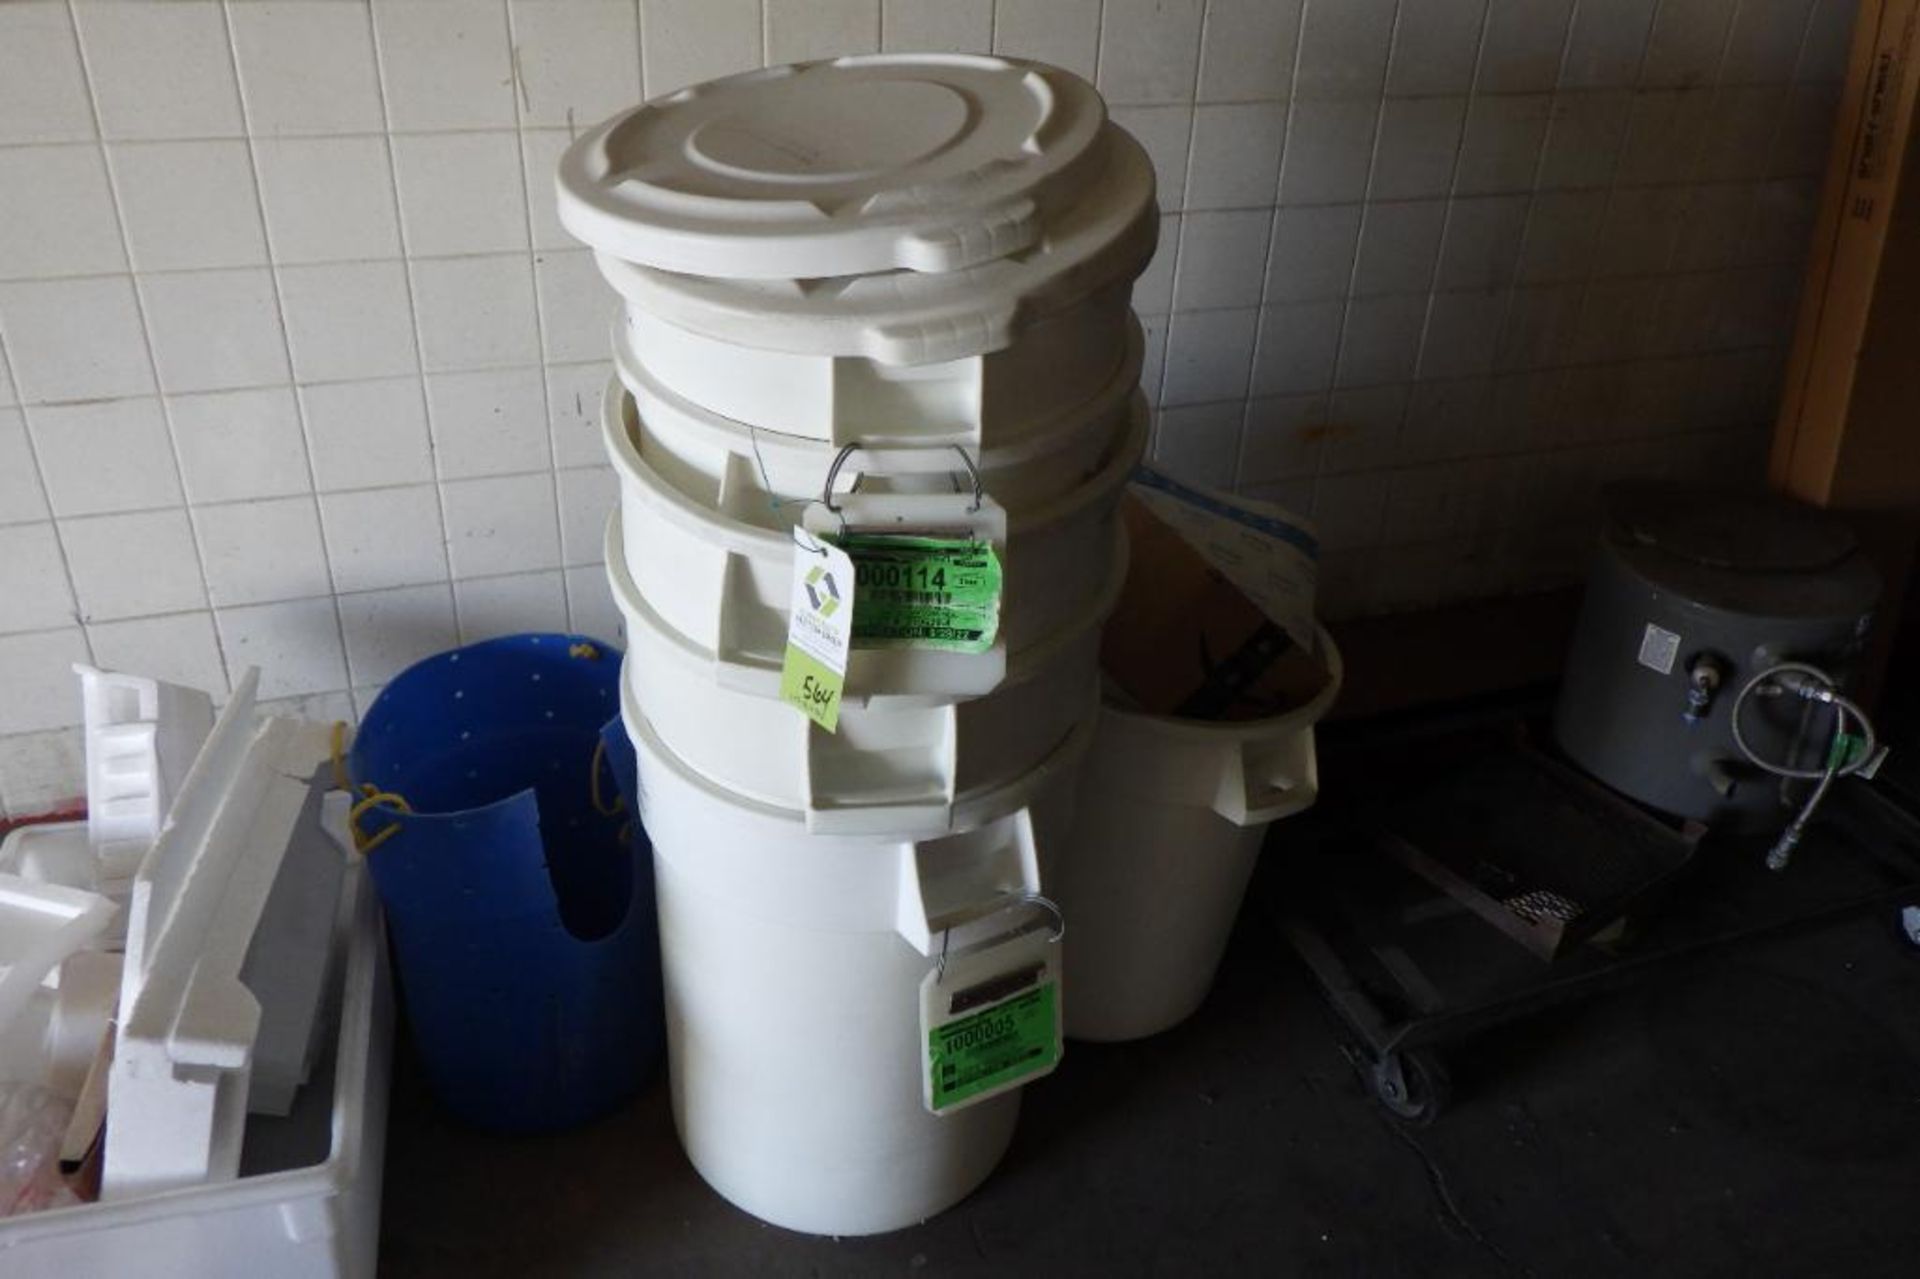 Lot of assorted Rubbermaid trash bins and lids